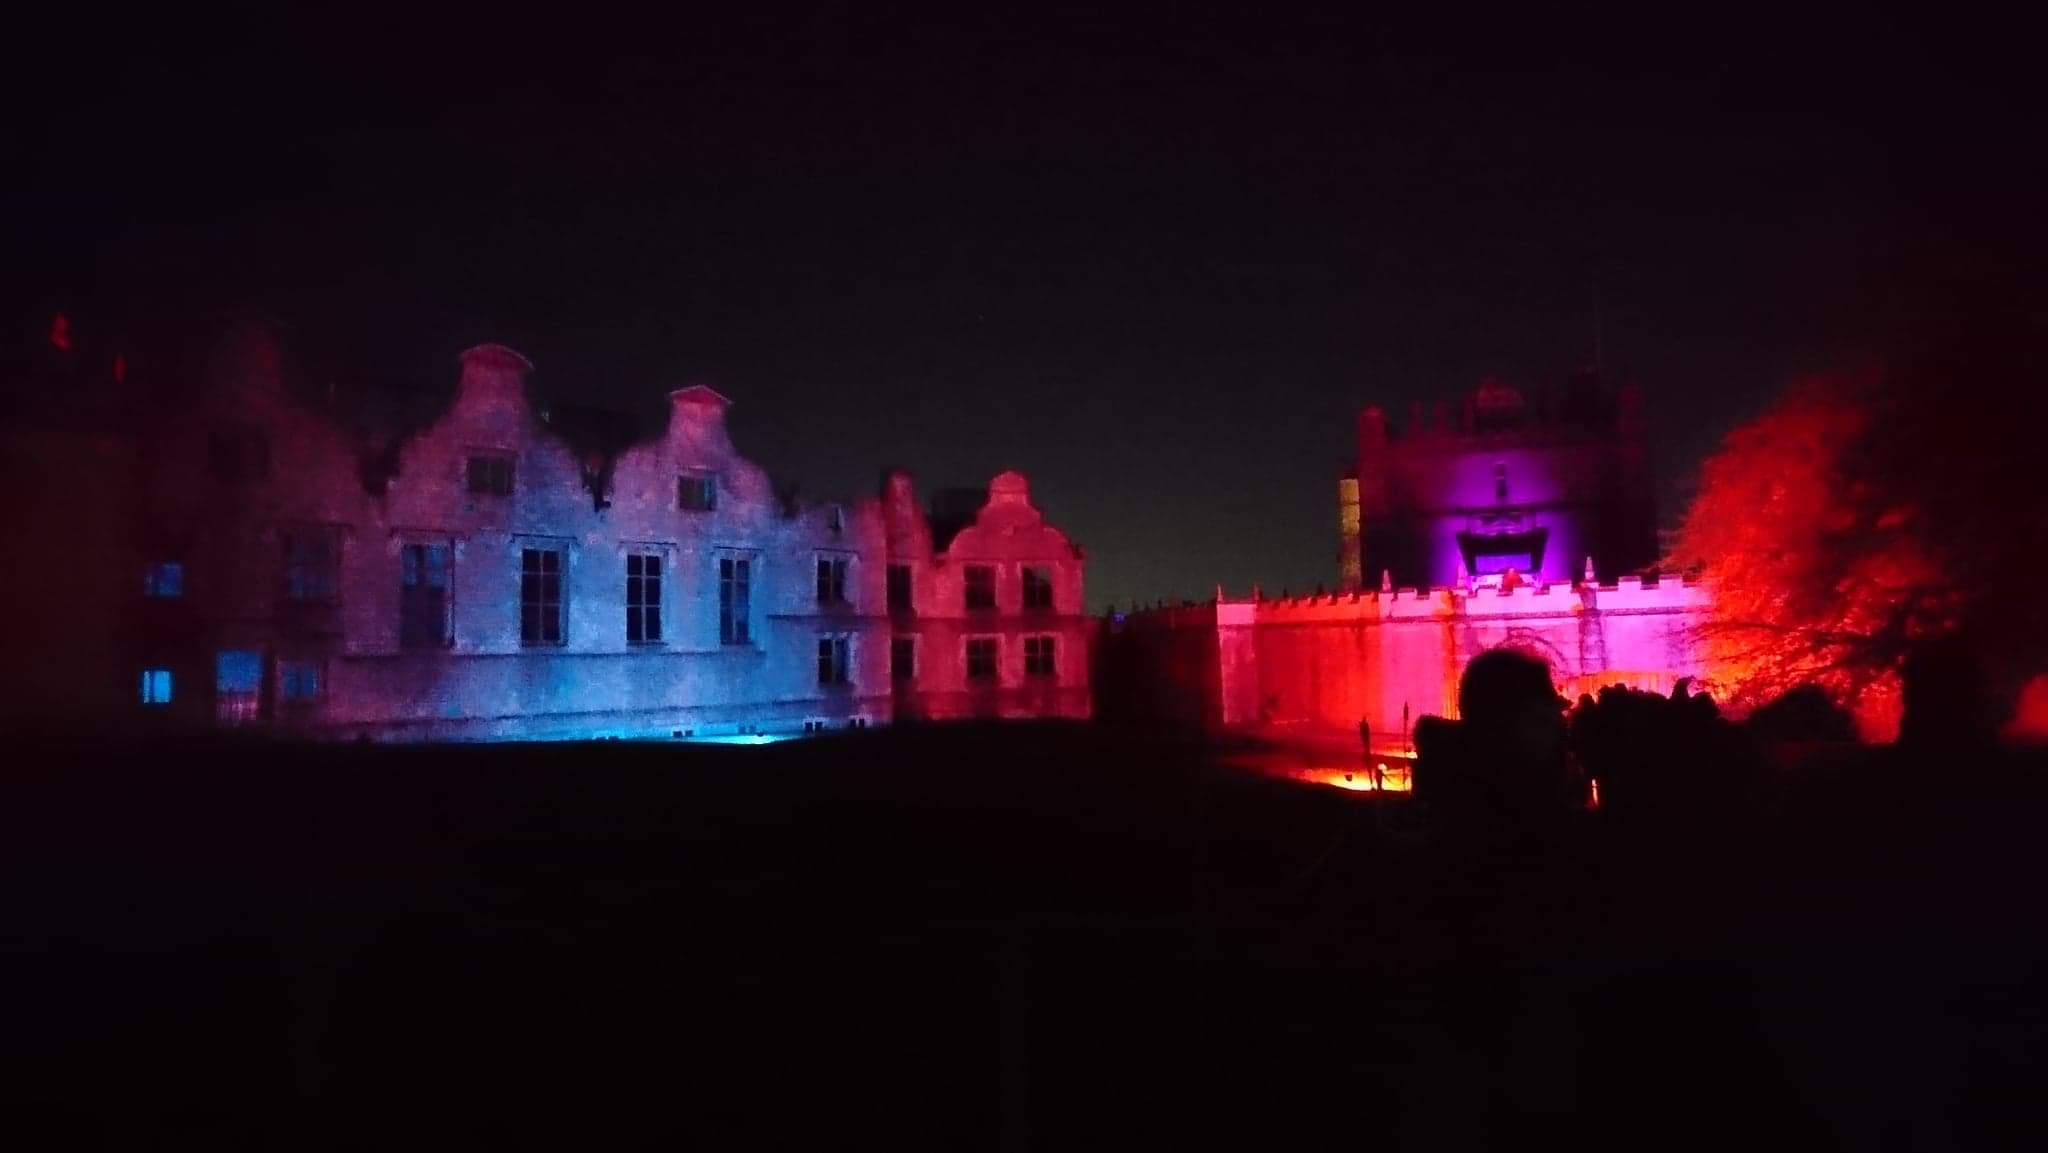 A night time shot of the ruins of Bolsover Castle and the little castle lit up with eerie purple lighting on Halloween Night